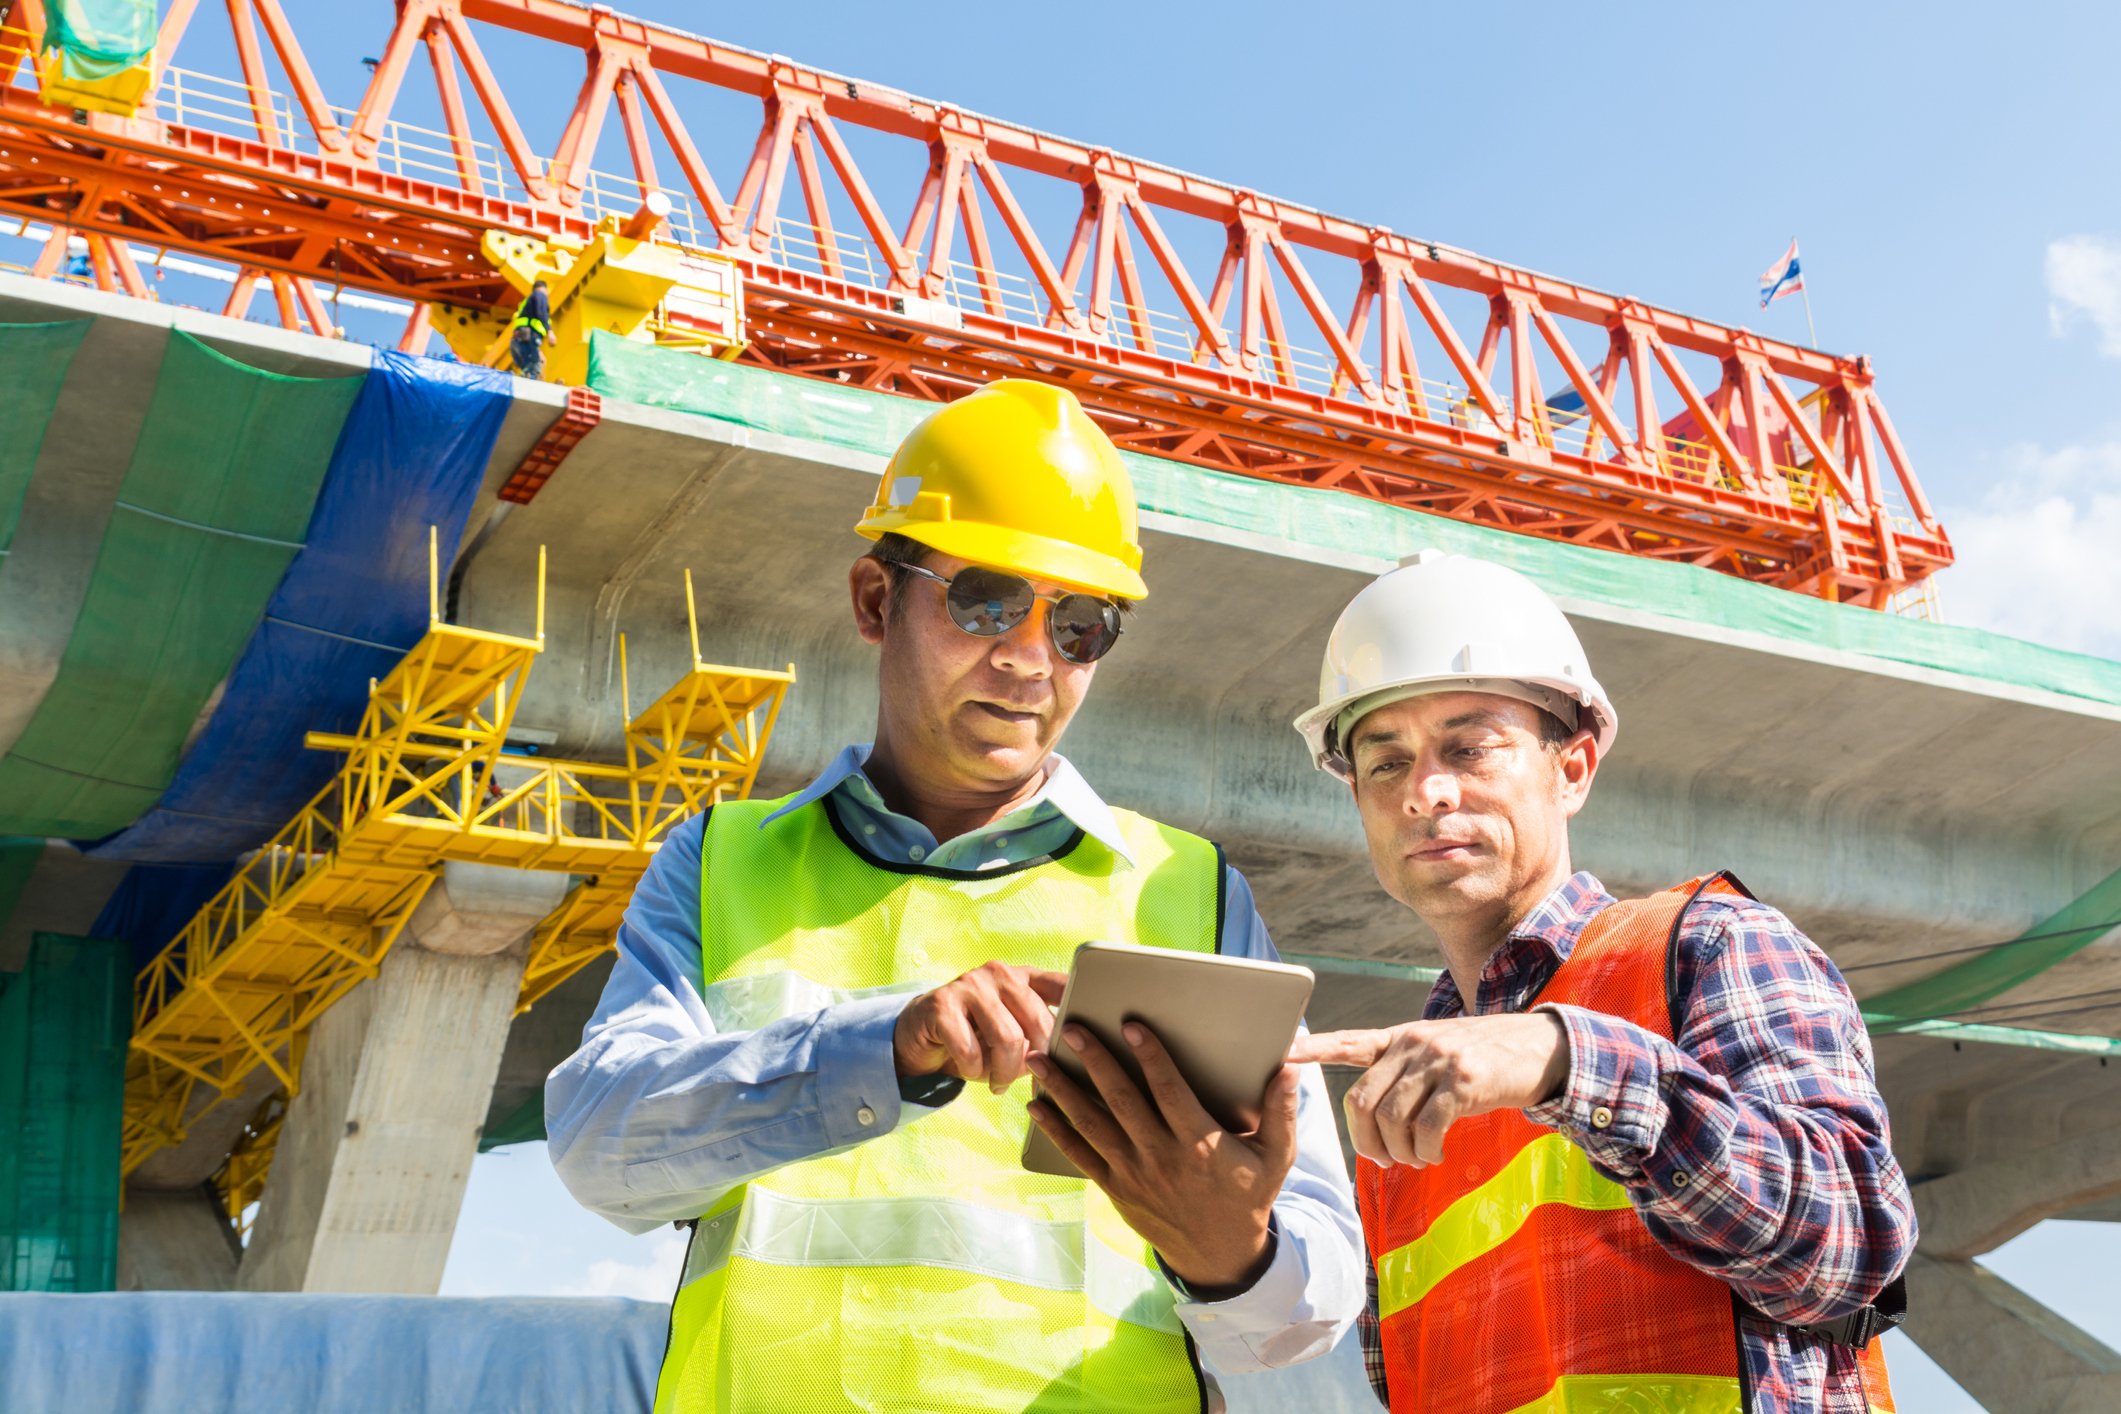 How to Find the Right Safety Program for Your Construction Company